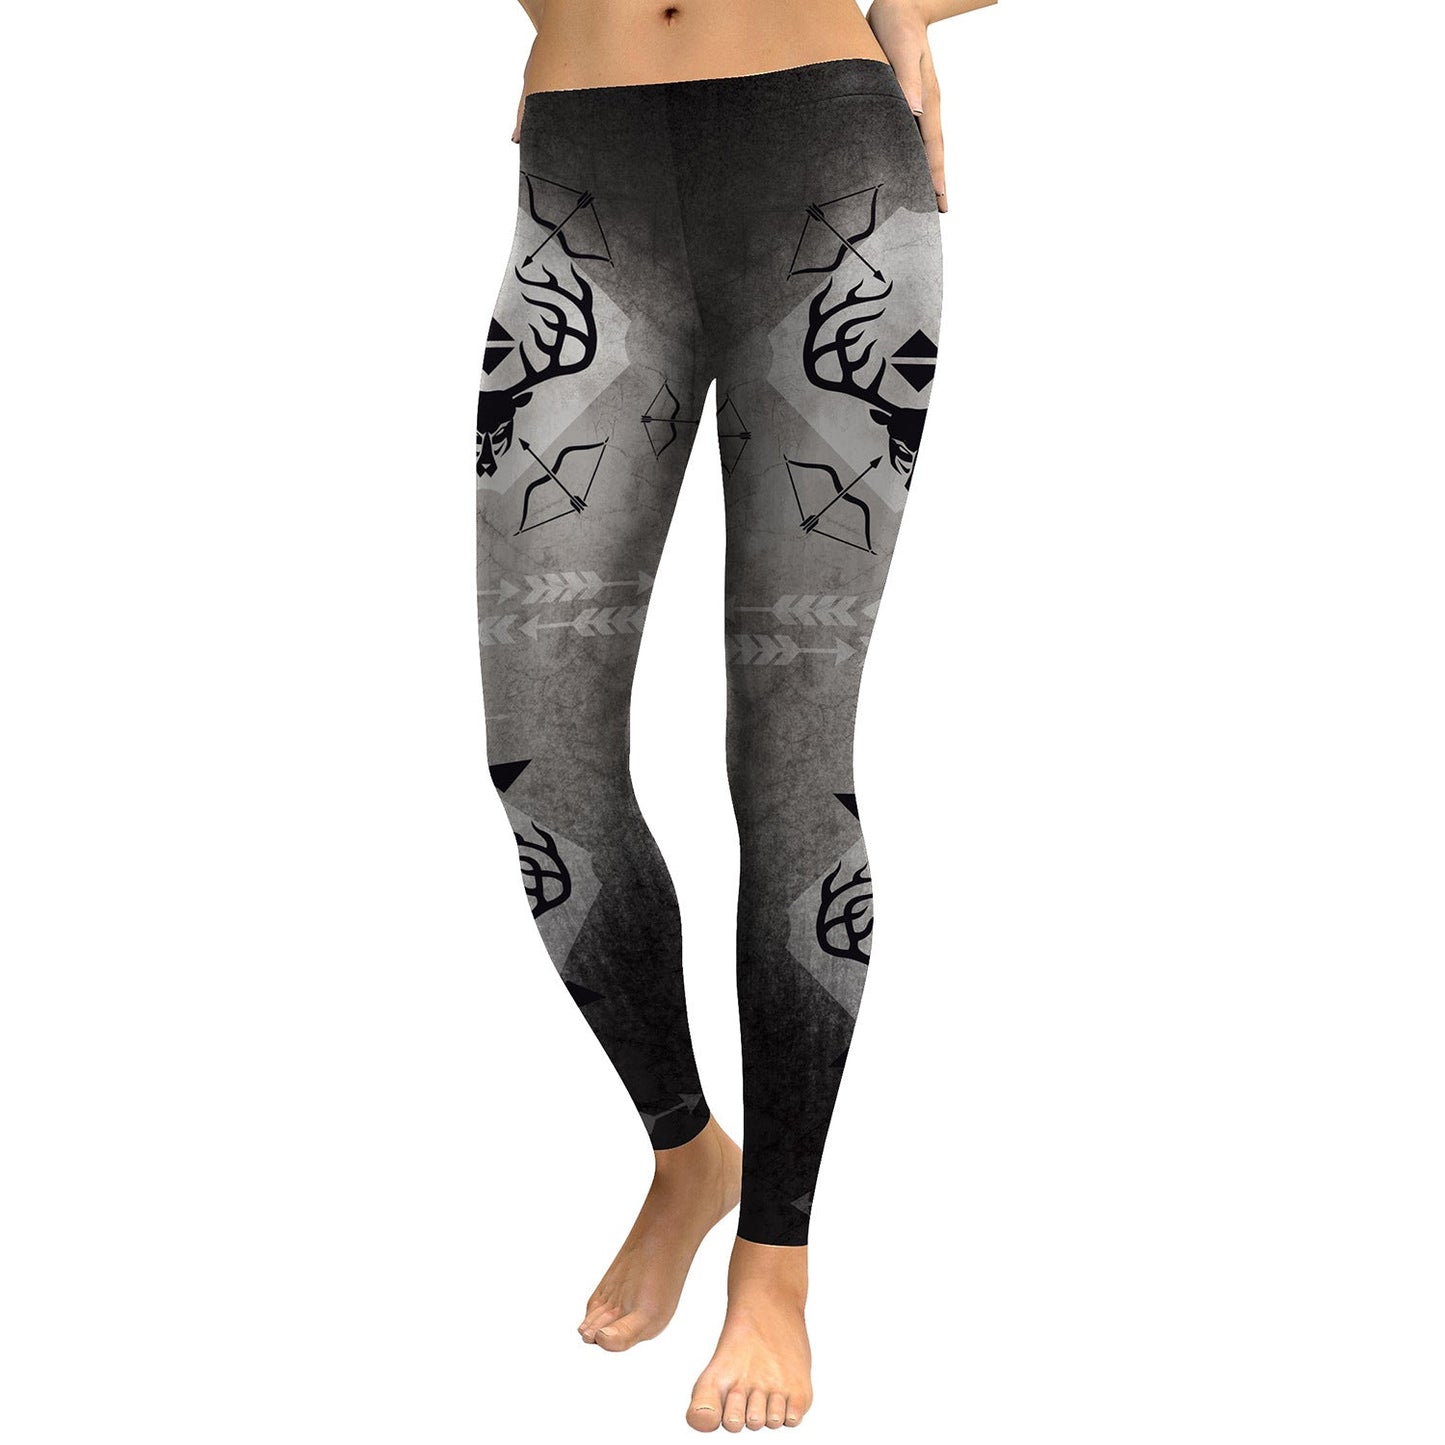 Sexy 3D Print Halloween Leggings for Women-Pants-KDK1811-S-Free Shipping at meselling99